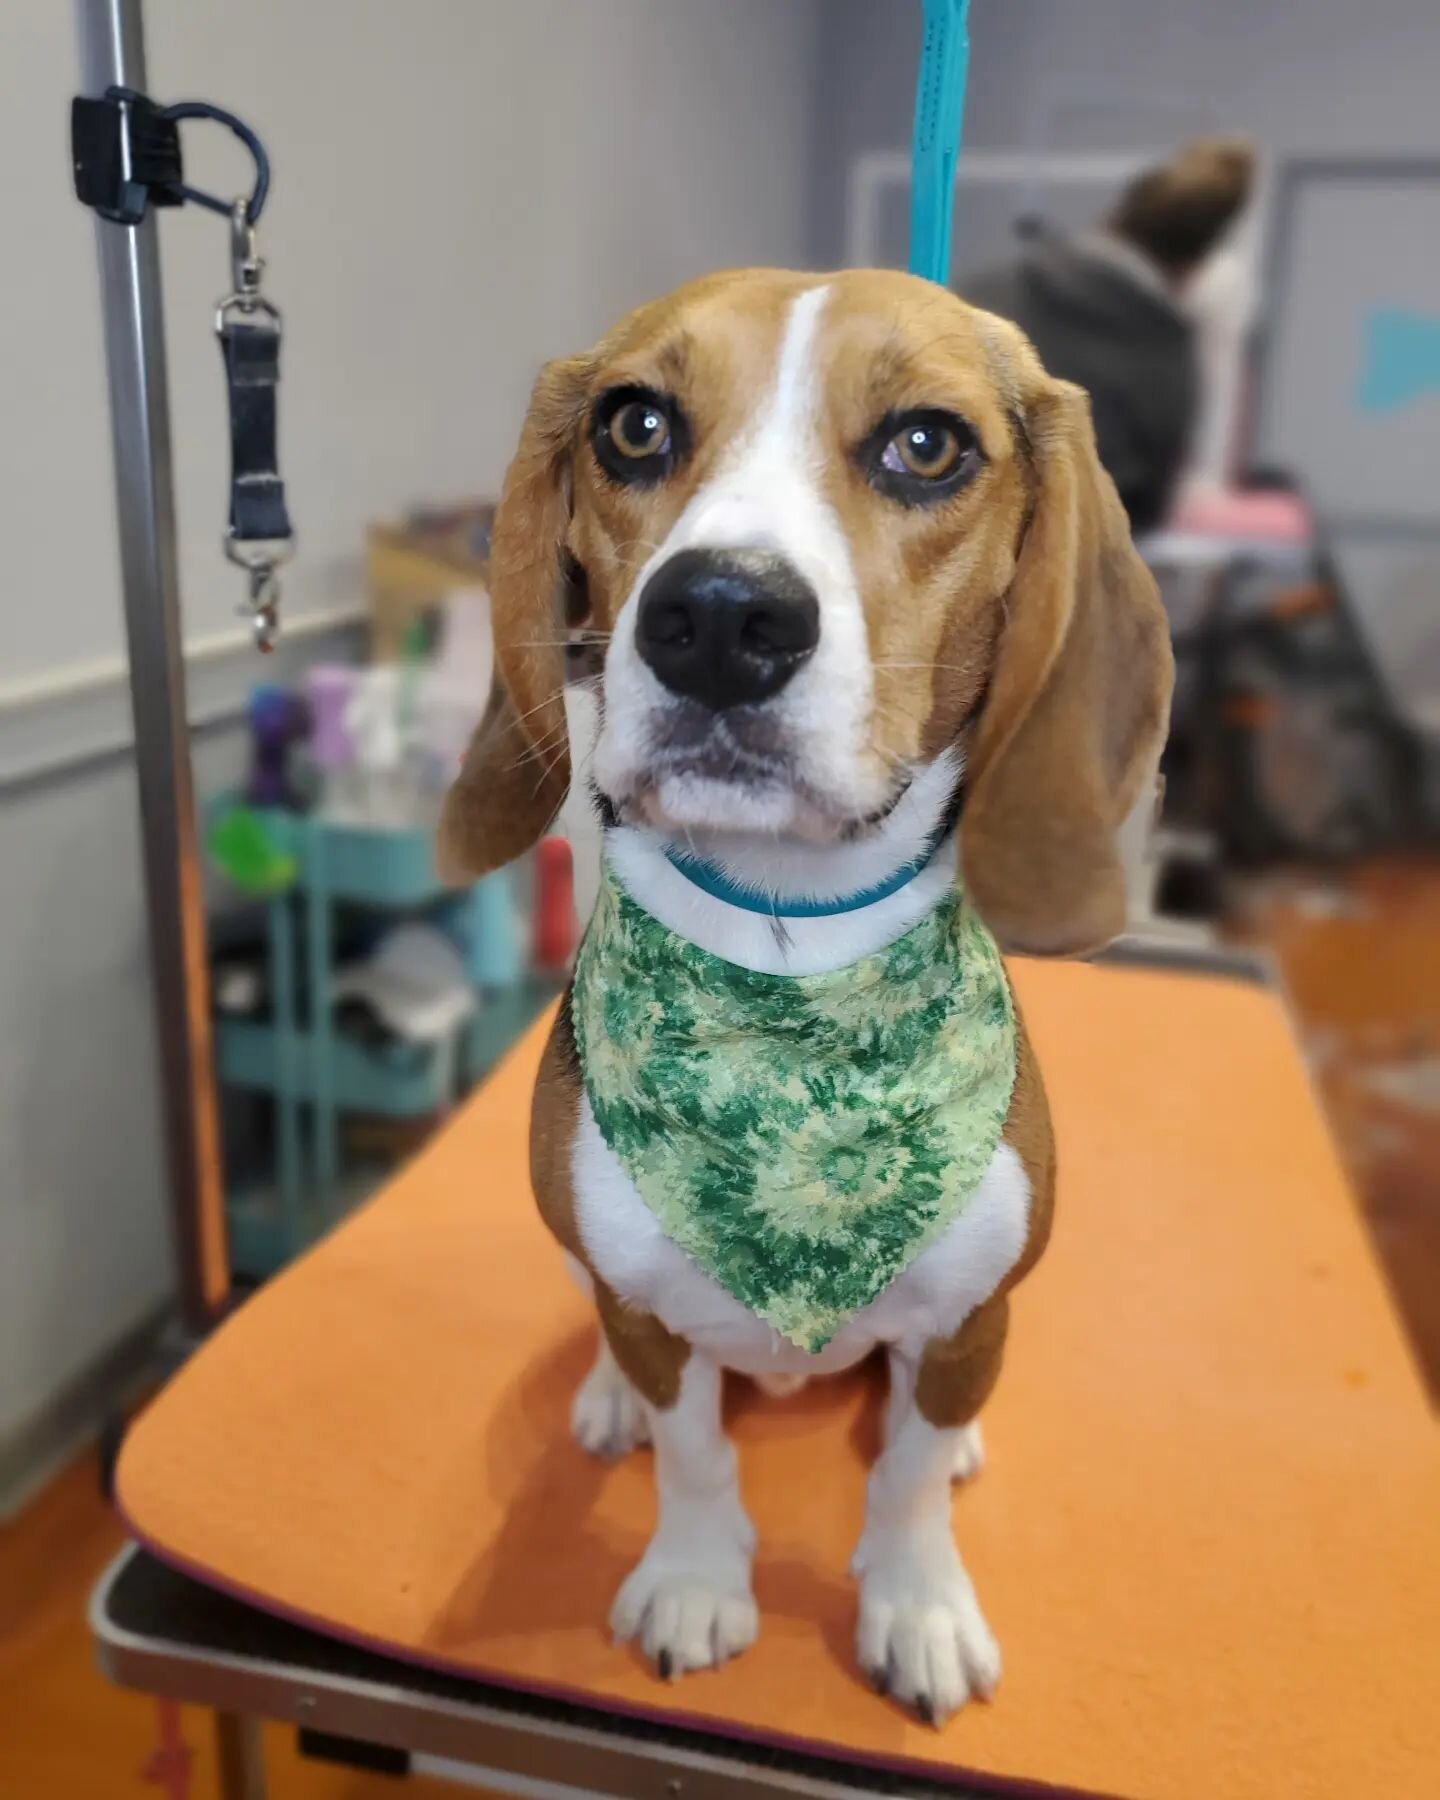 Green with envy over those eyes 😍

#beagle #everypupshouldbealittlefoxier #stayfoxy #foxydogs #foxydogsmpls